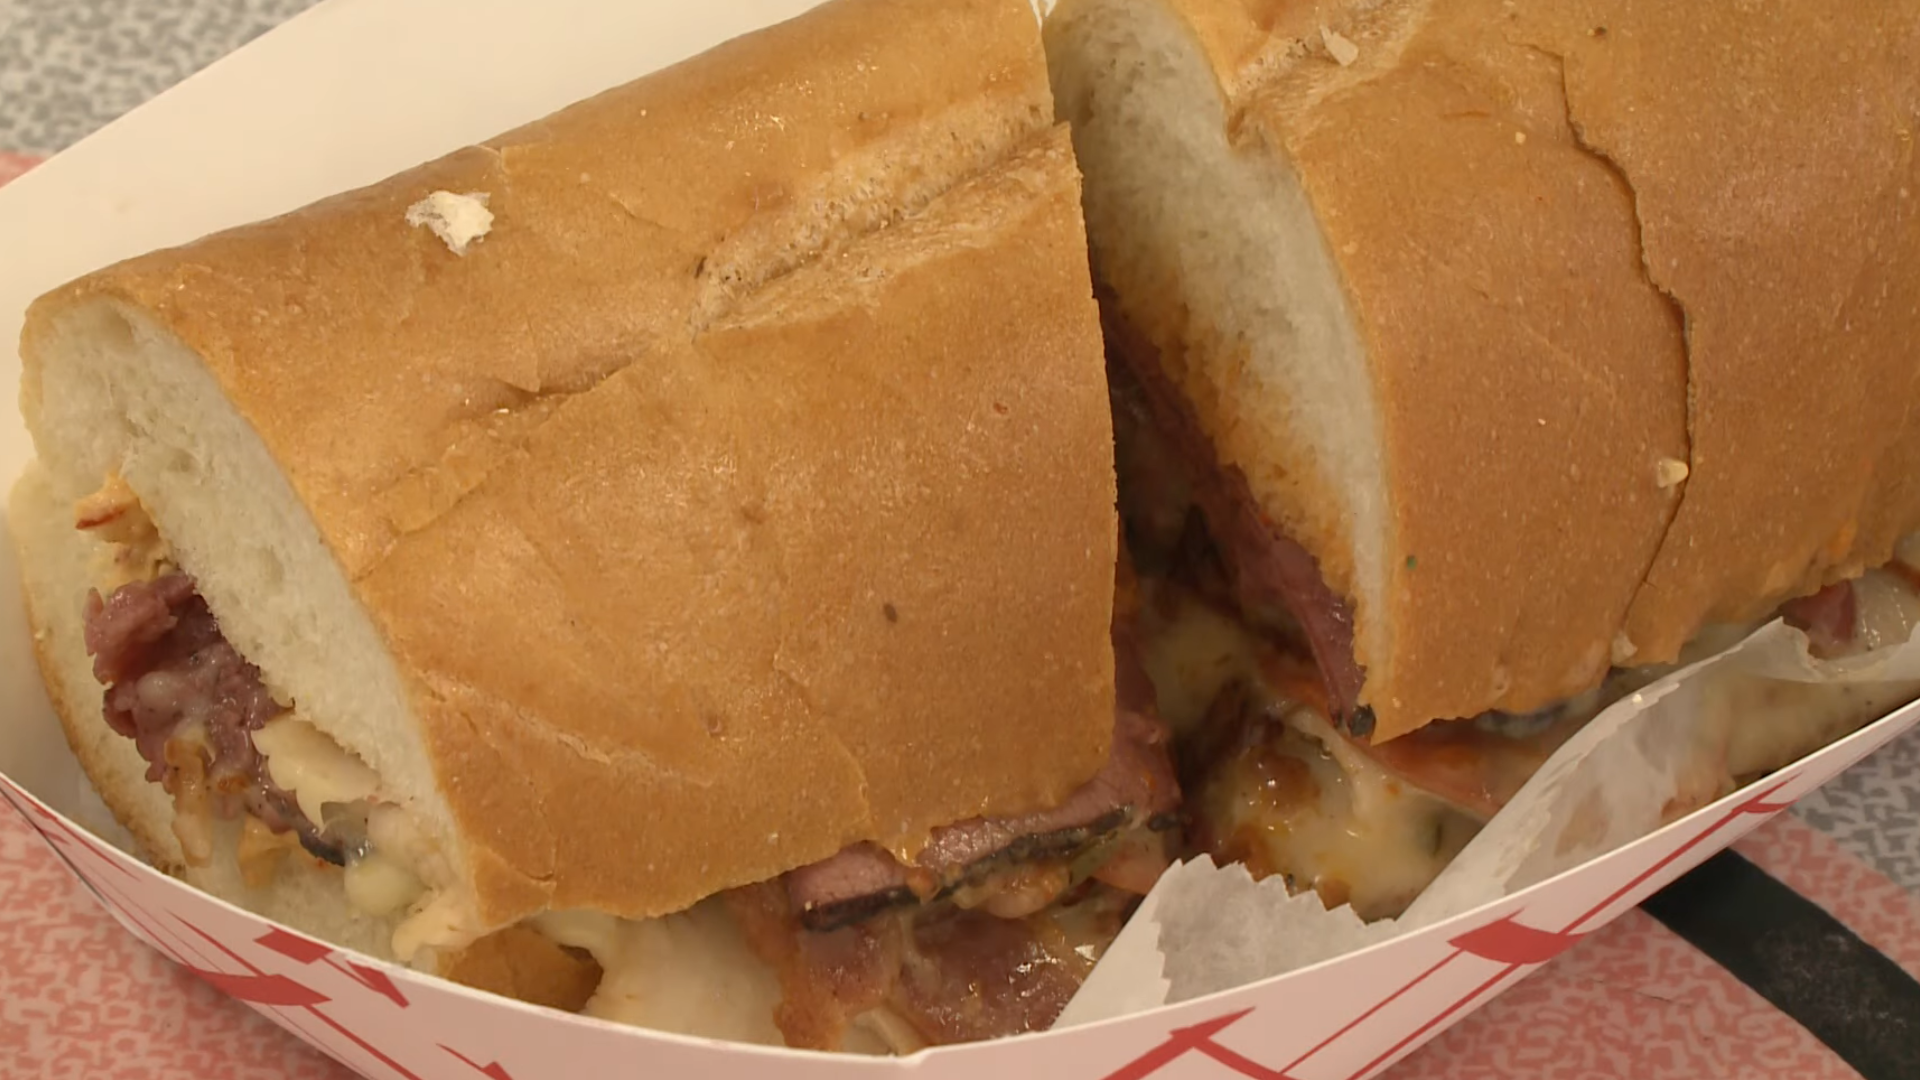 Frank Cusumano stopped by LeGrand's for this week's food picks.